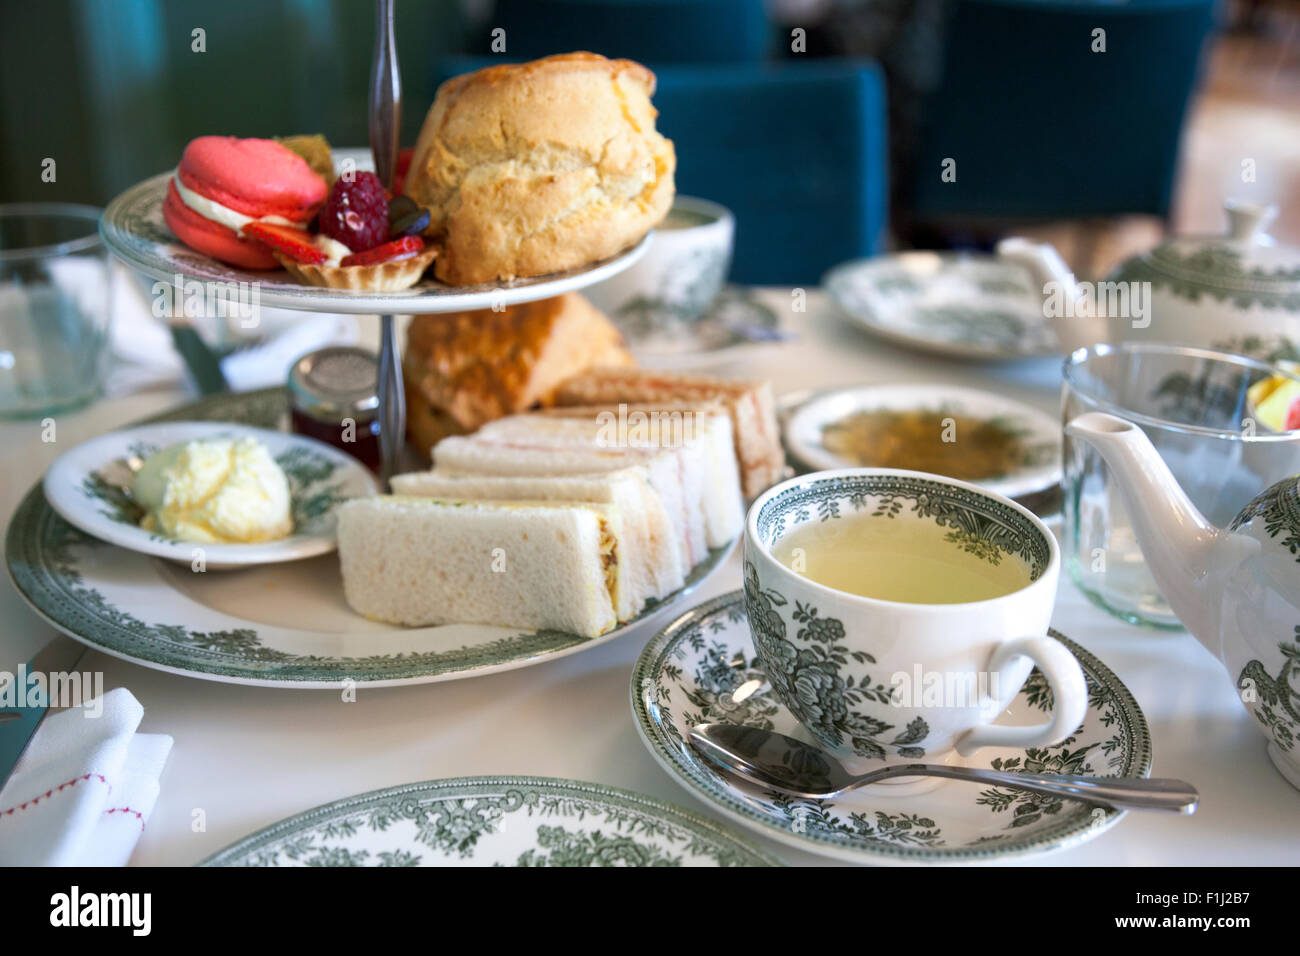 Traditionellen Afternoon Tea (am Wellcome Collection, London) Stockfoto